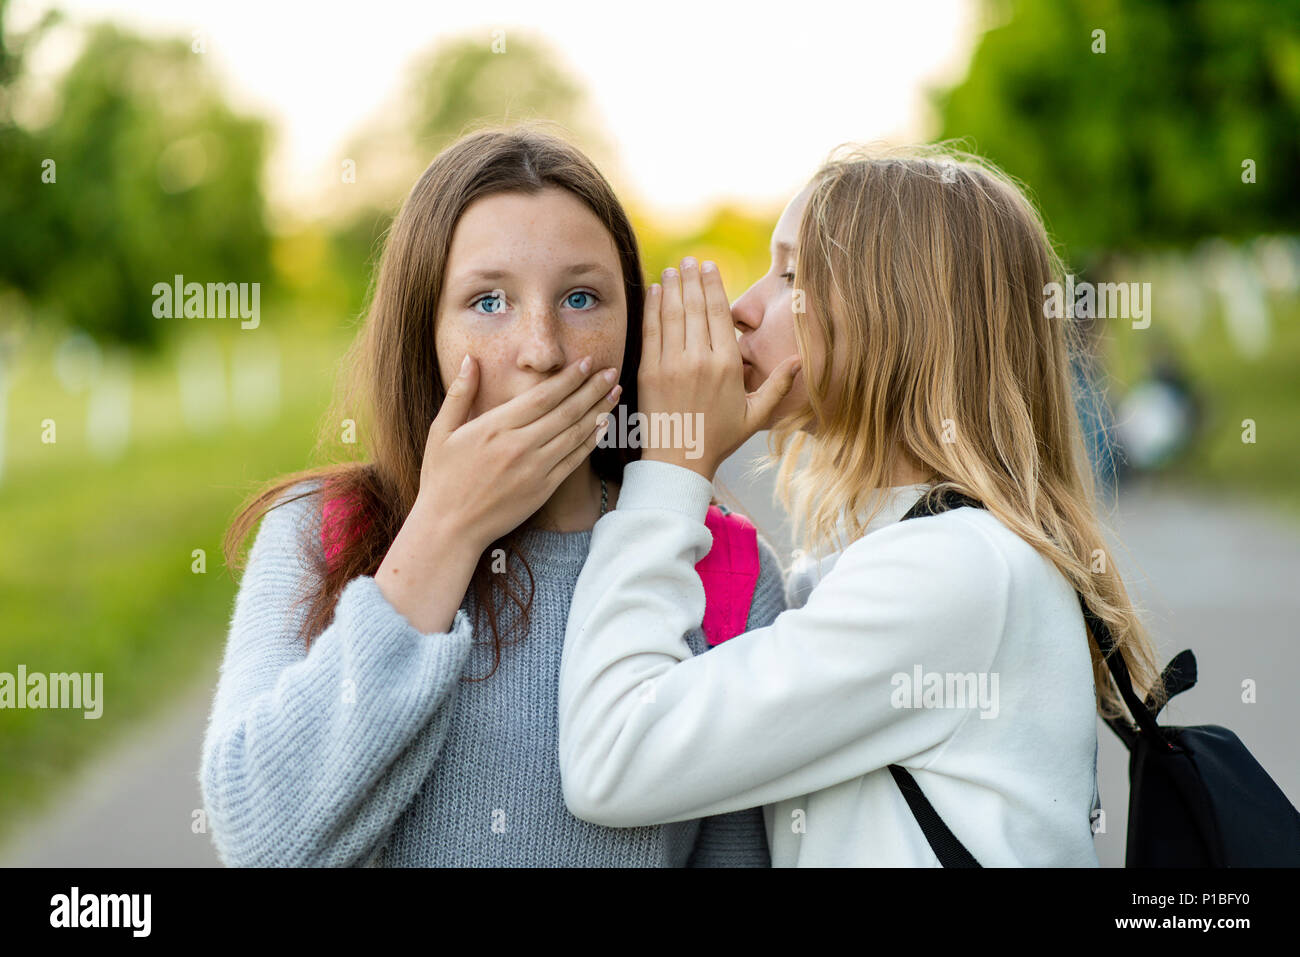 Where girlfriends schoolgirls. Summer in nature. They tell each other a secret. Surprise fear. Emotions of surprise. Dressed in casual clothes. Suddenly, indignation. Stock Photo